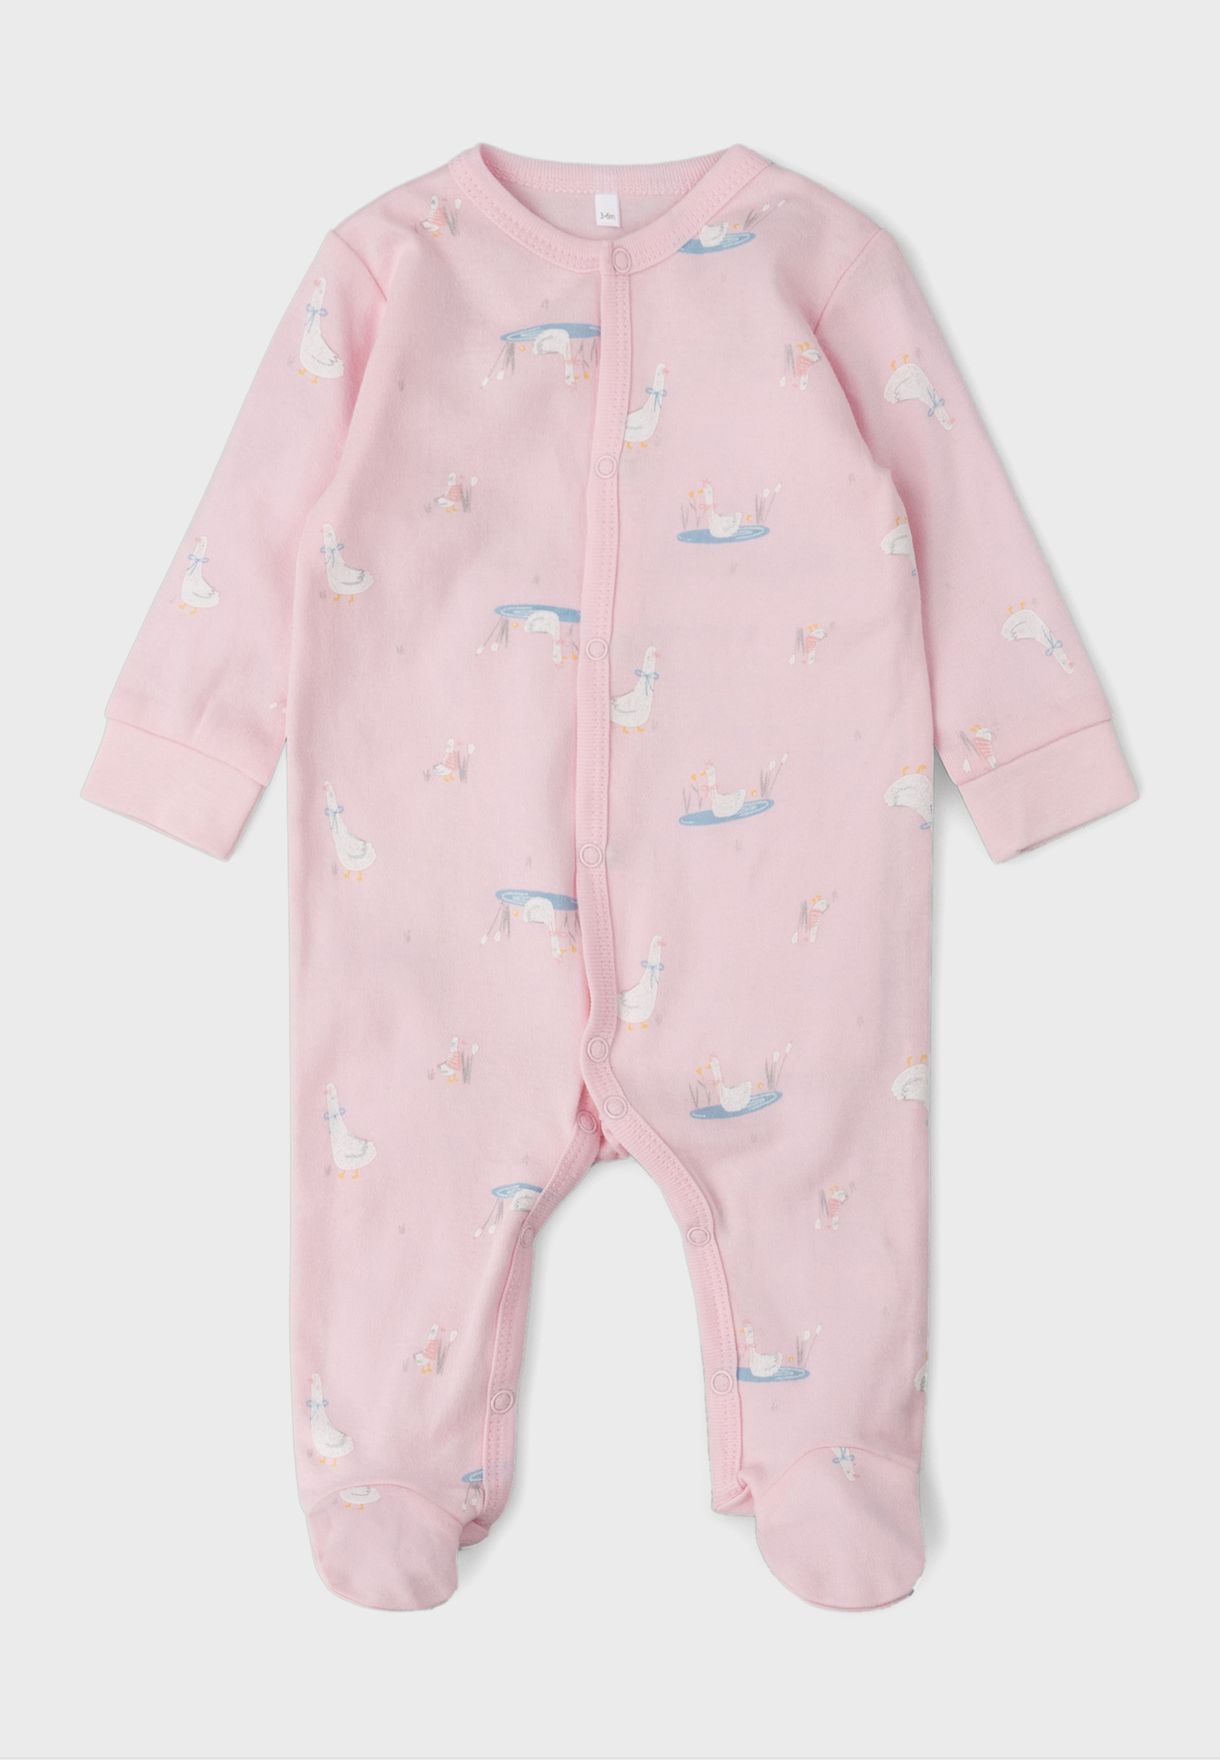 Infant Geese Sleepsuit + Hat And Bib Set